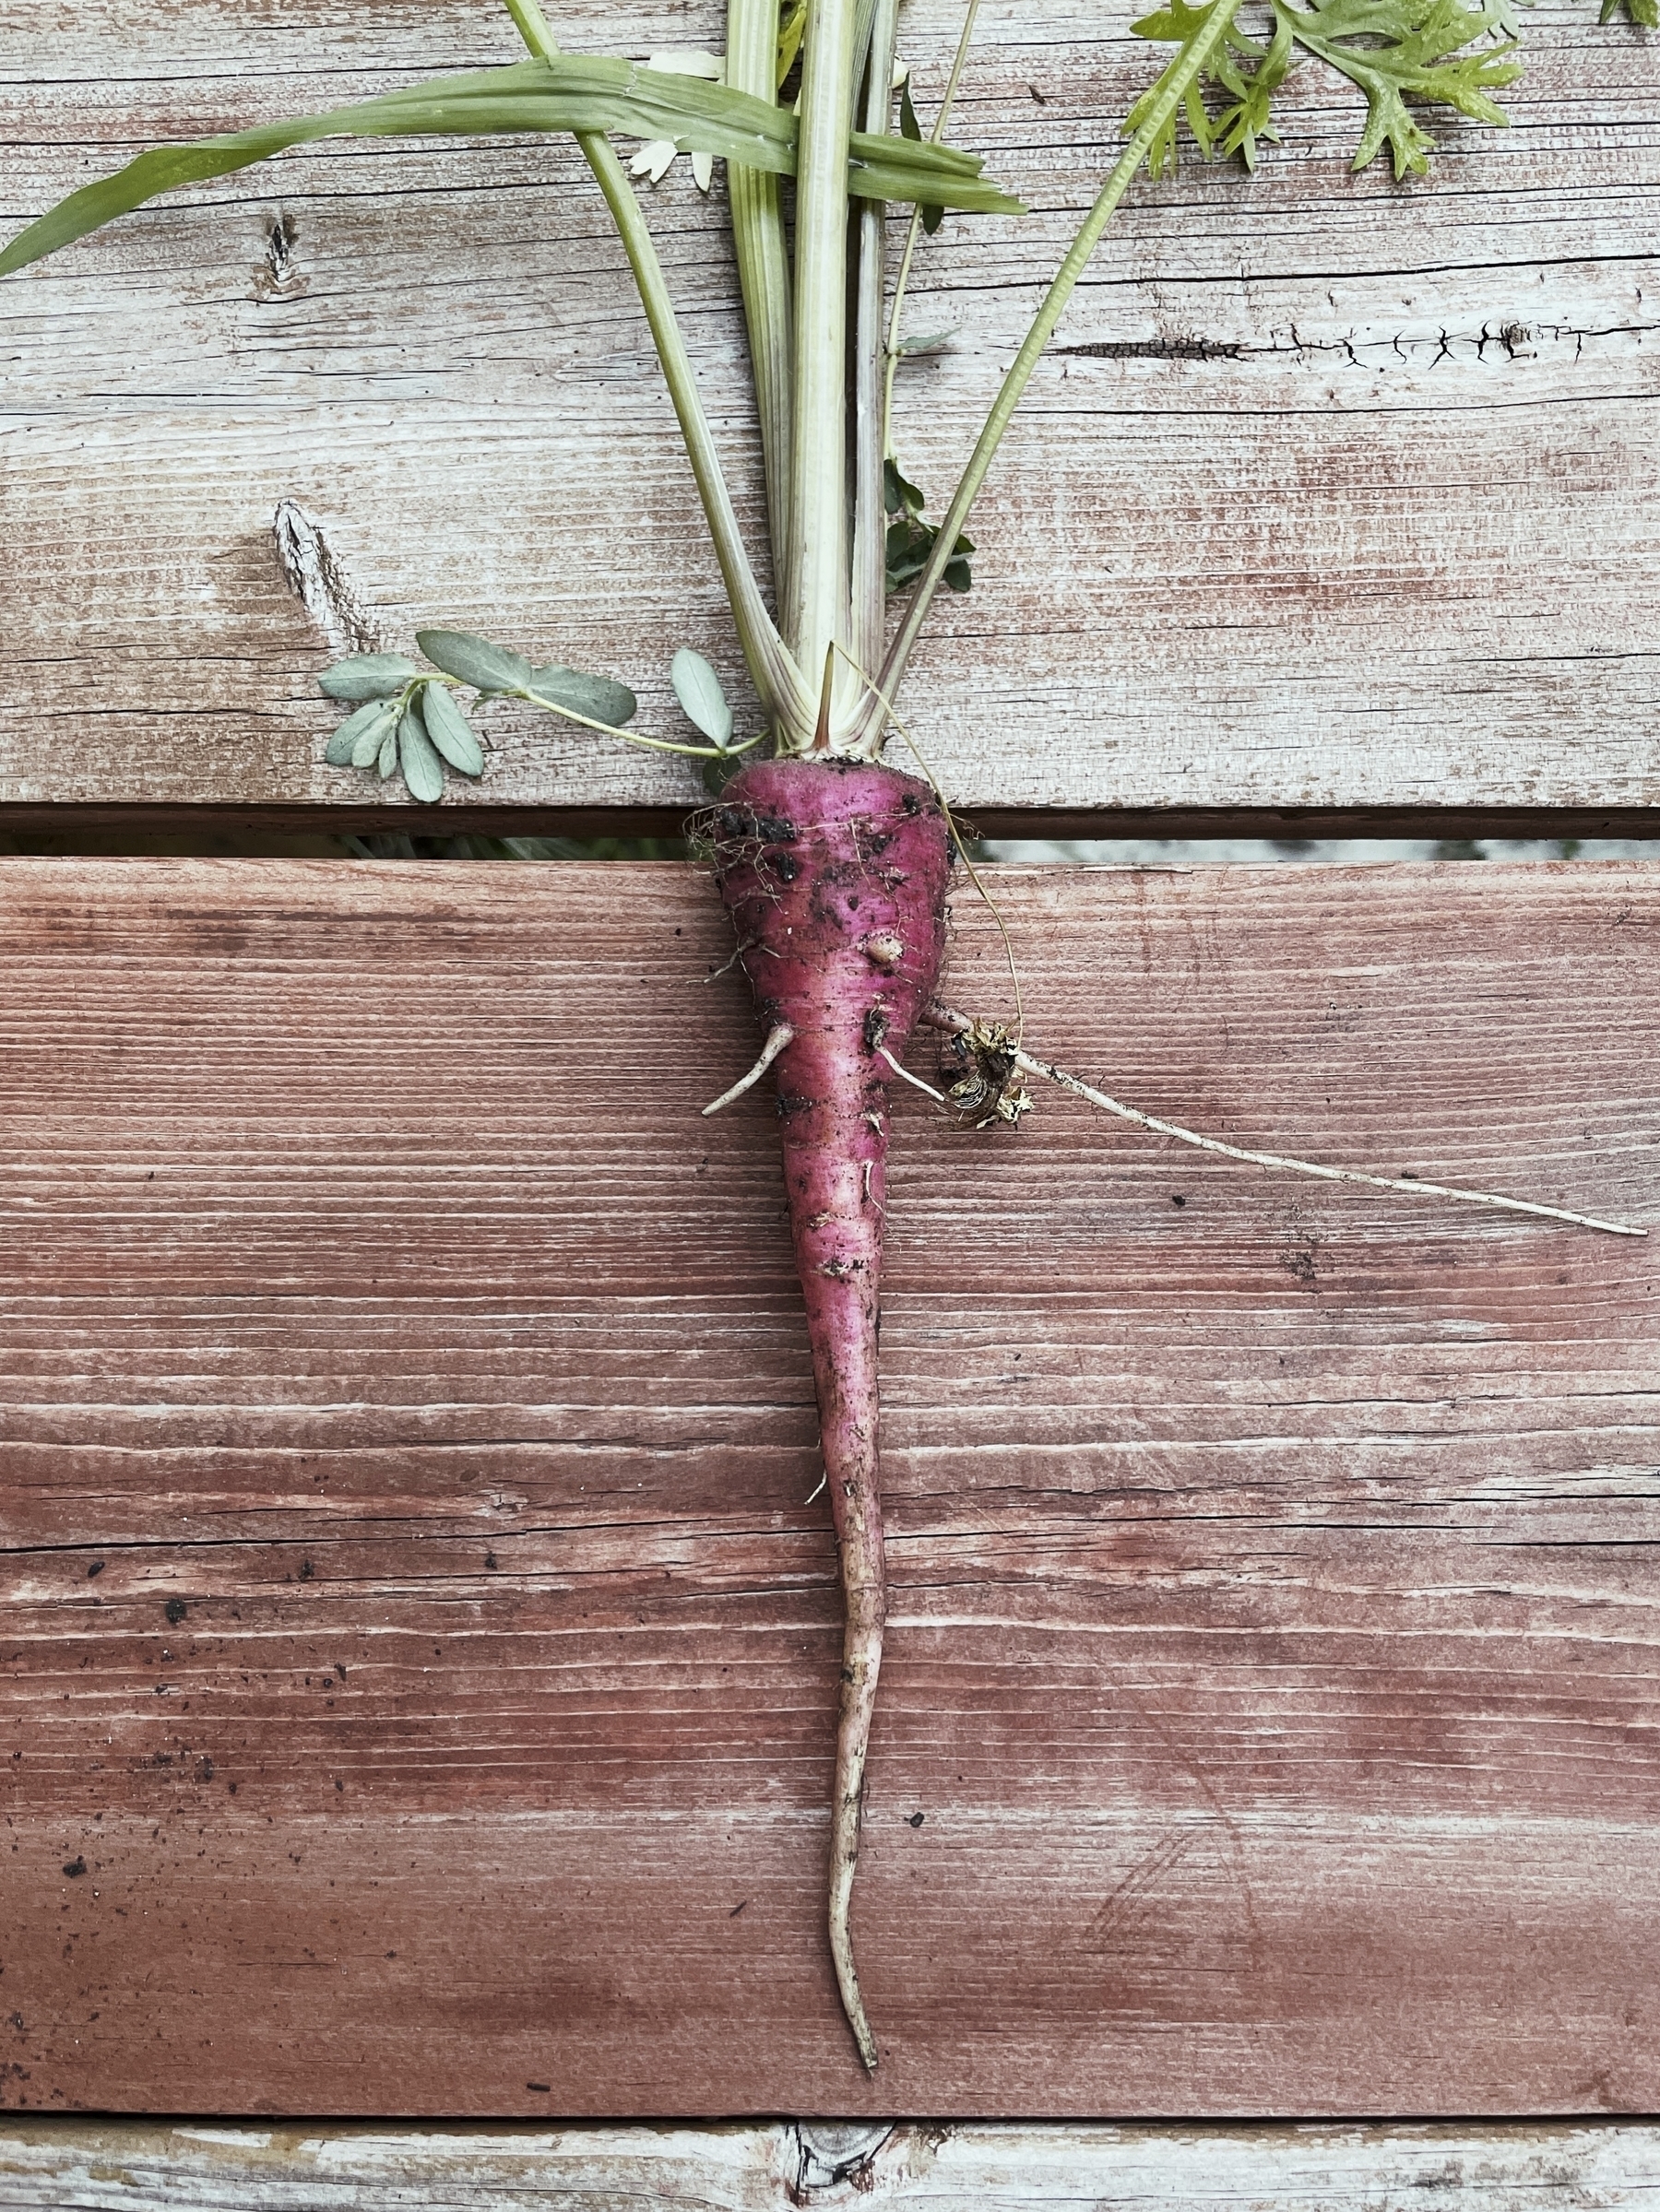 A strange looking carrot from the garden